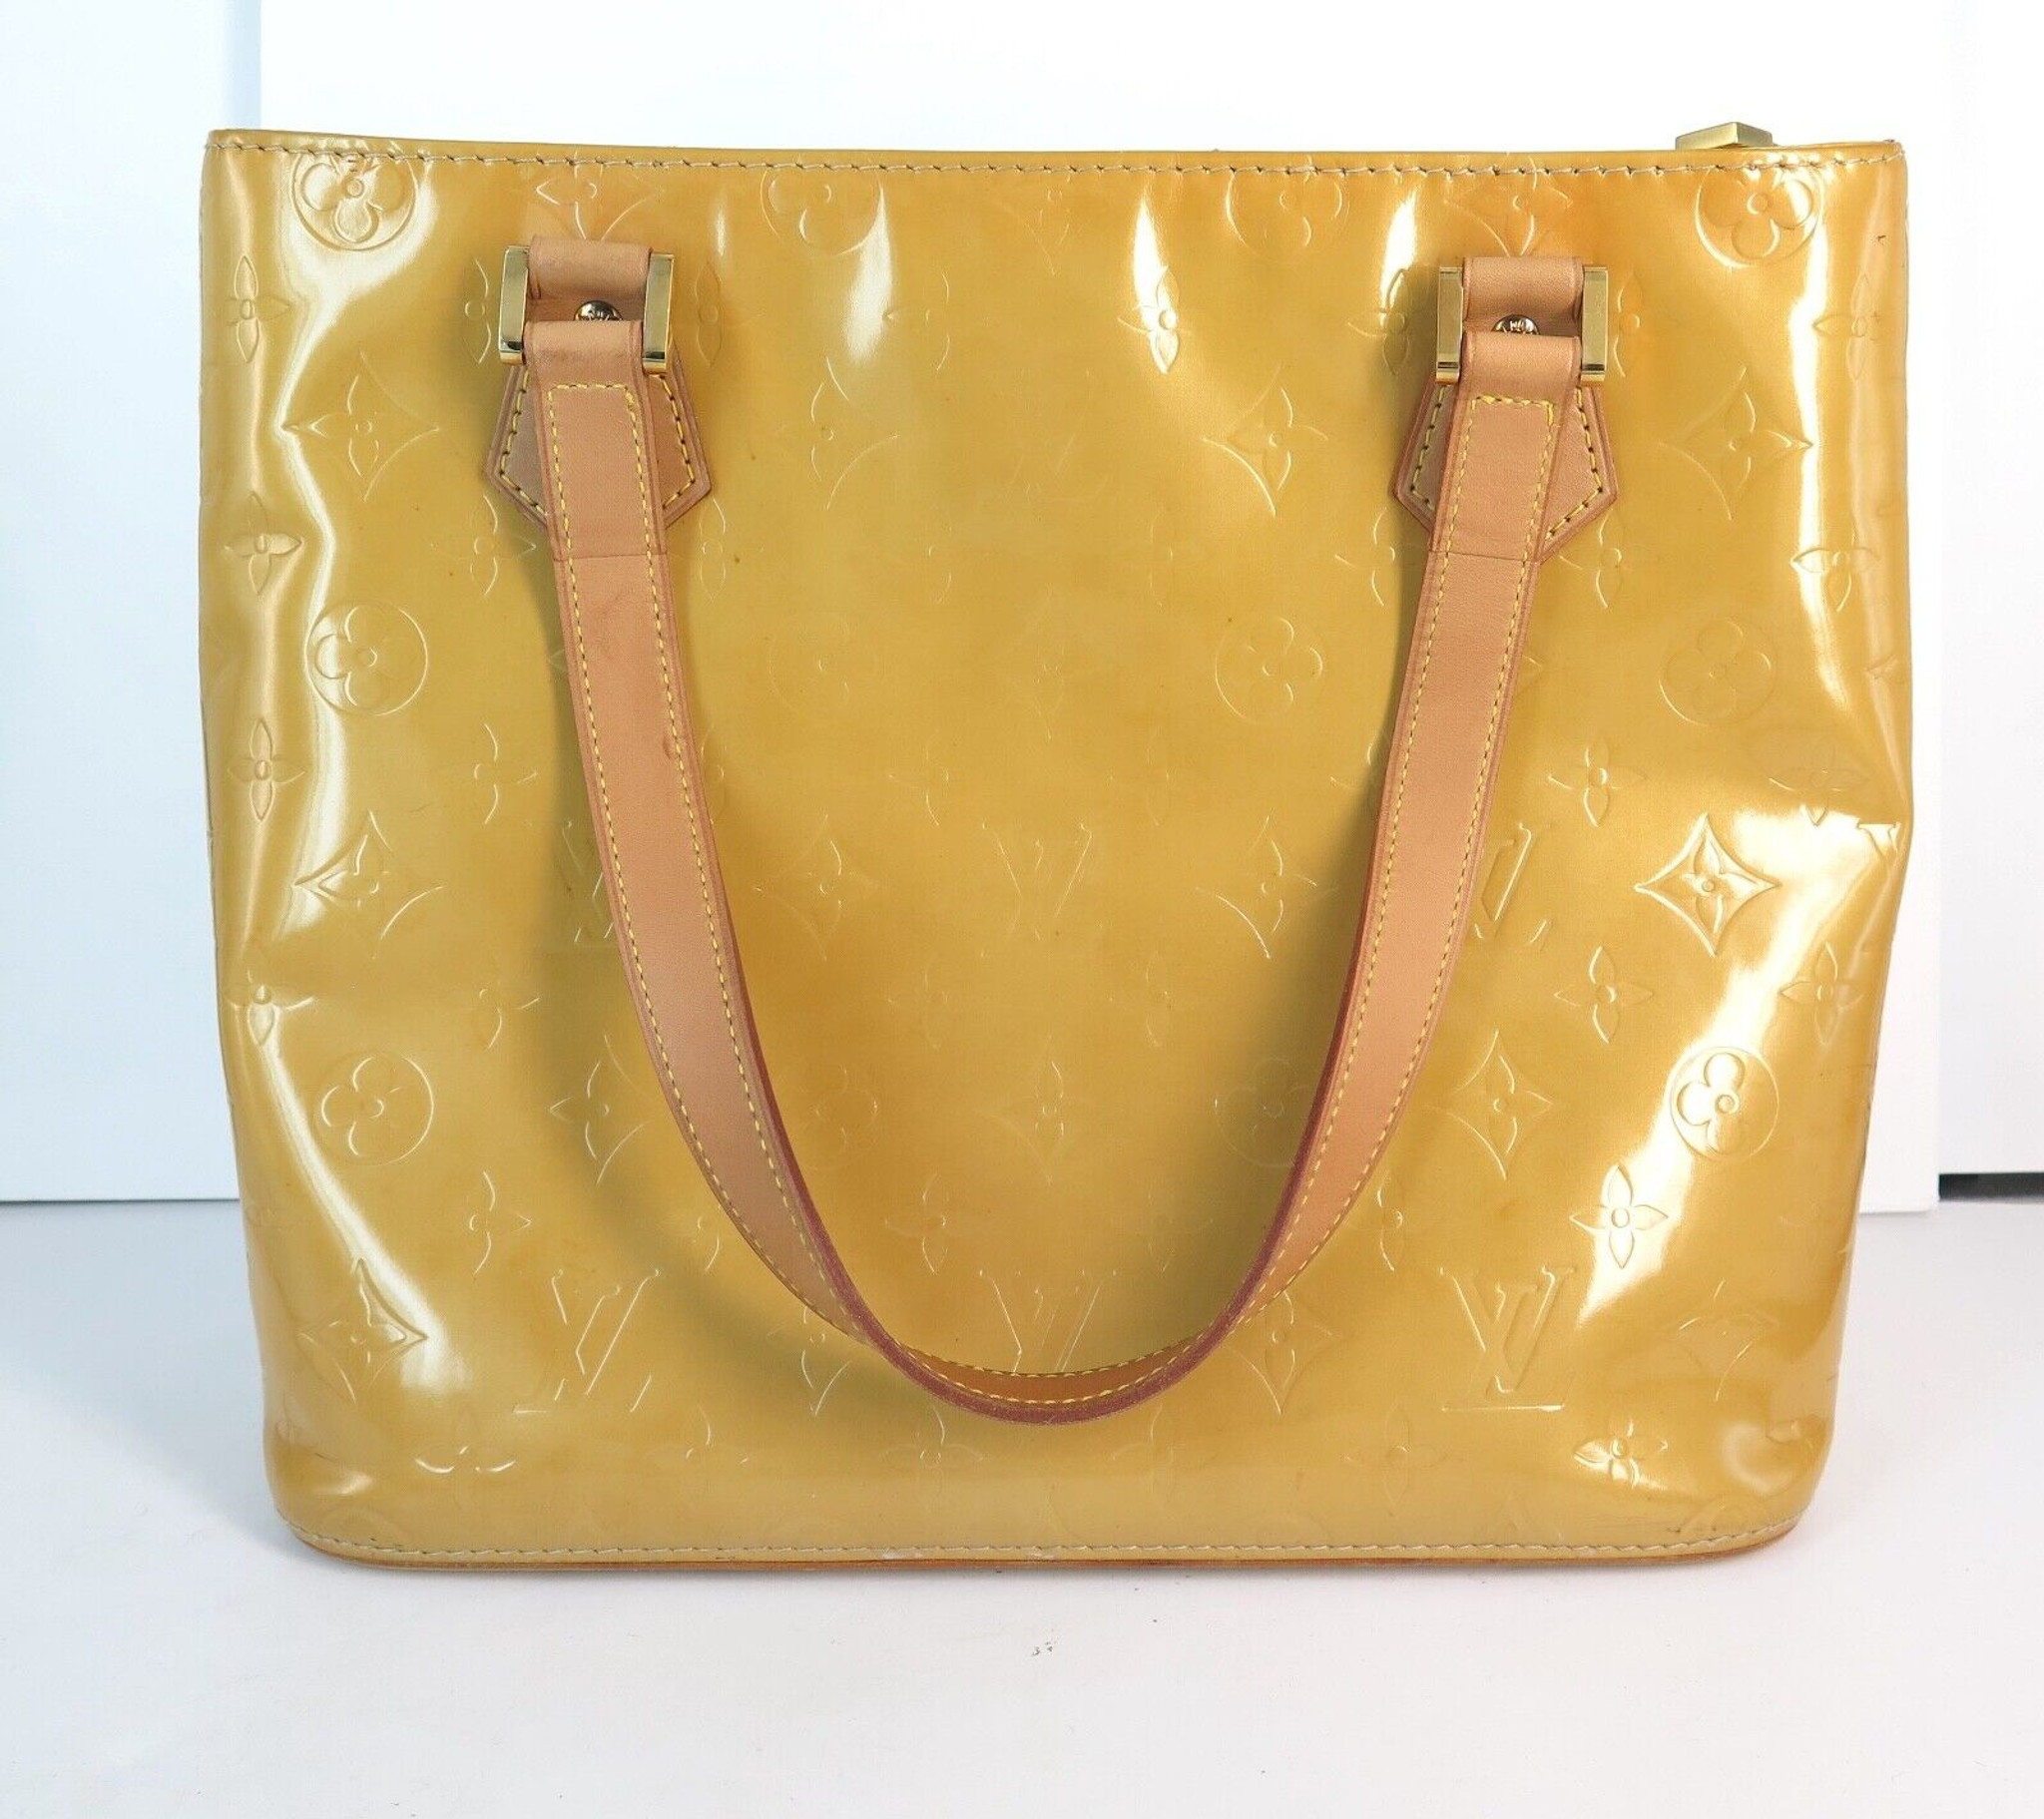 Vintage Louis Vuitton Vernis Houston Tote Bag in Colour Mustard with Dustbag